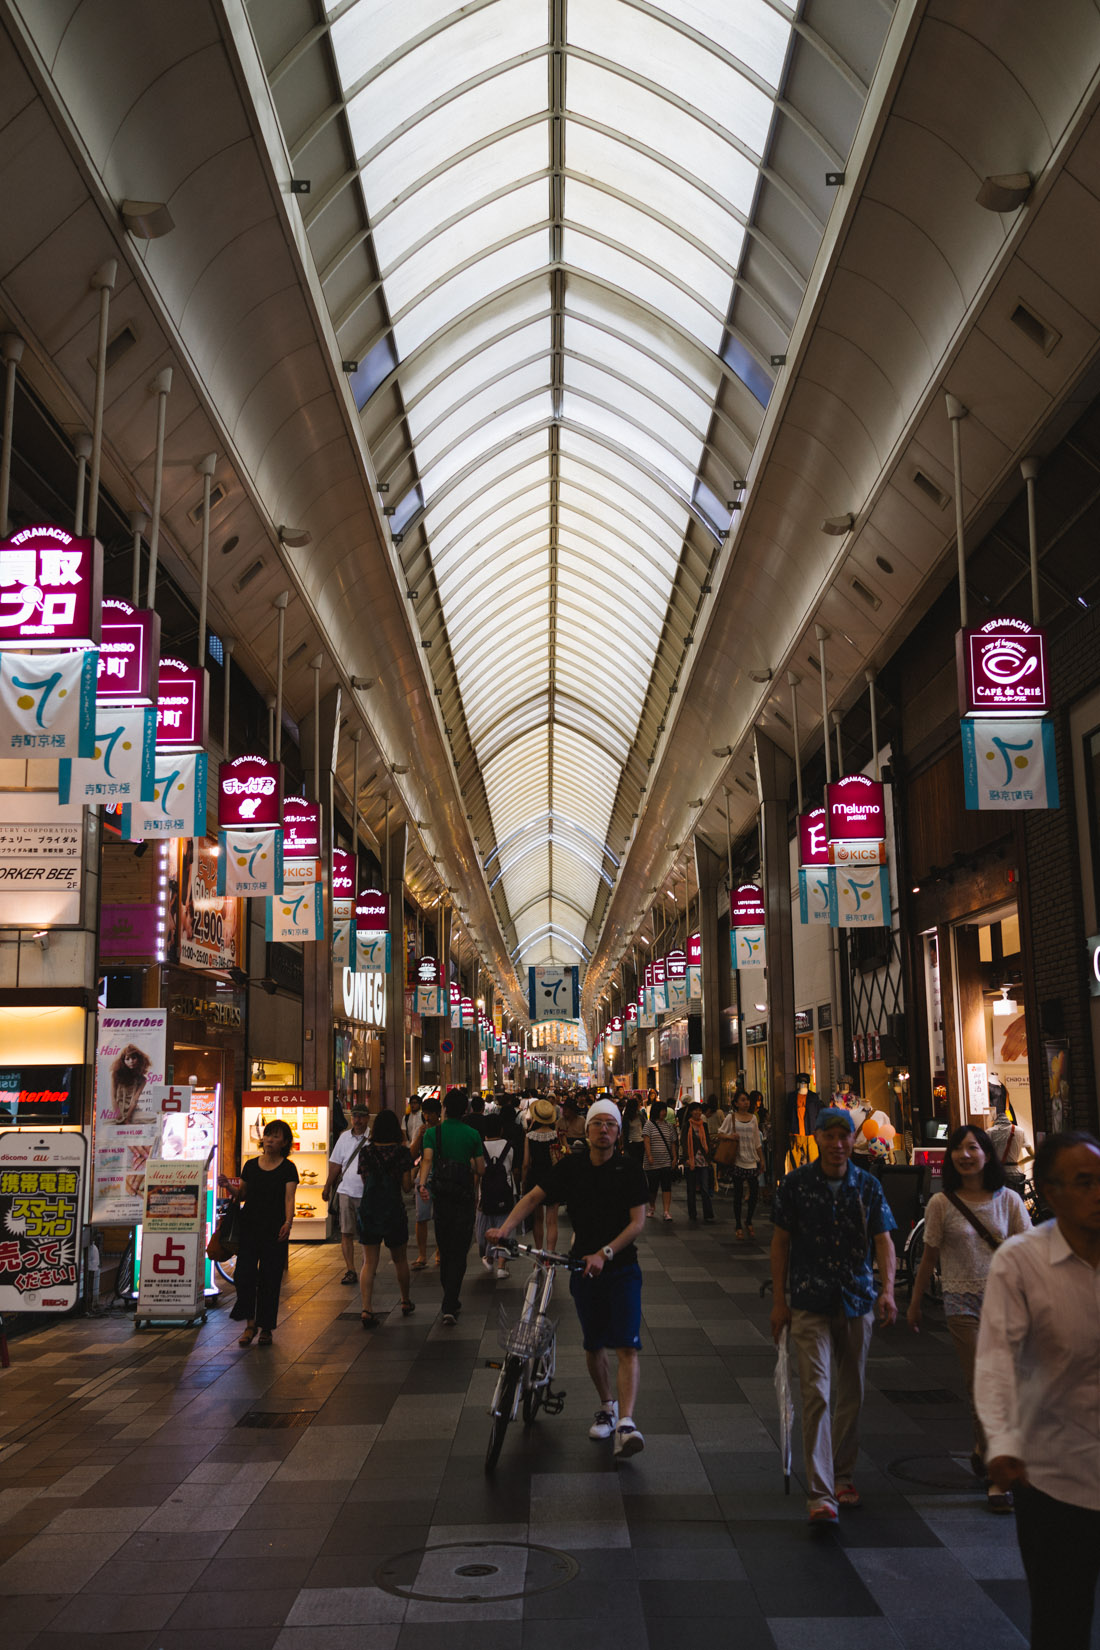 Kyoto's covered market and shops area.